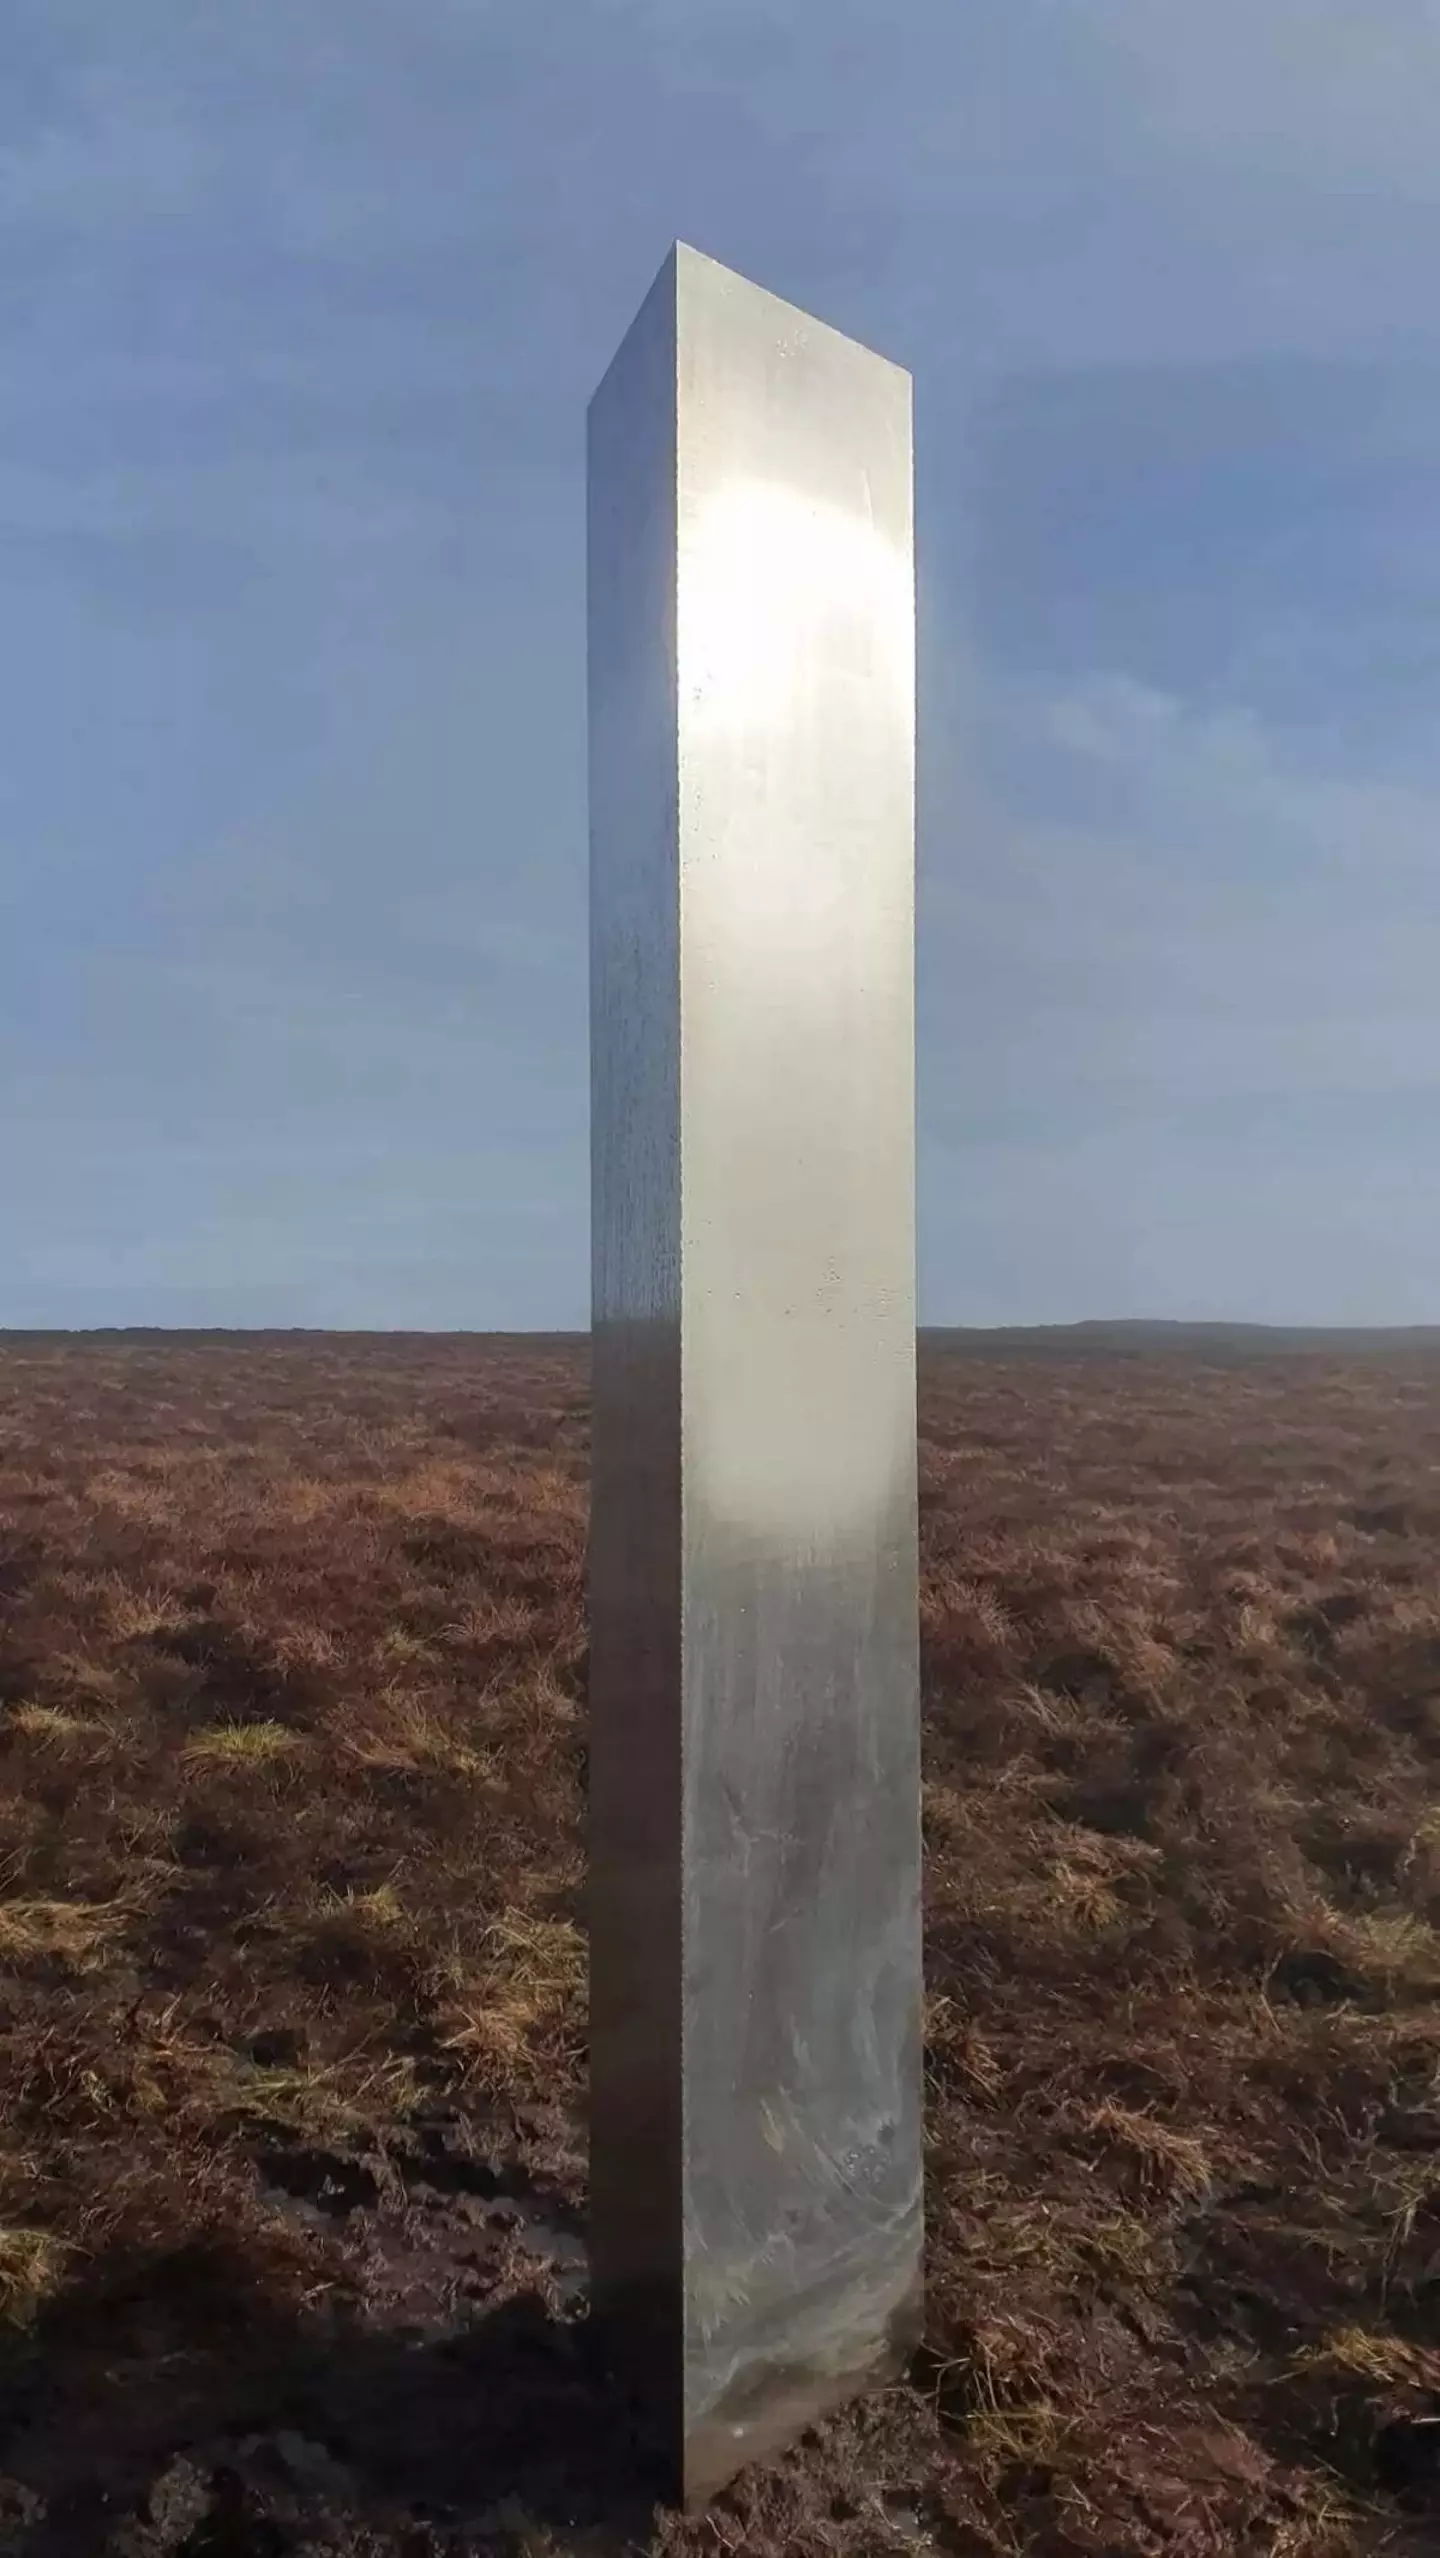 A fifth monolith has now appeared in the UK and locals don't really know what to think.